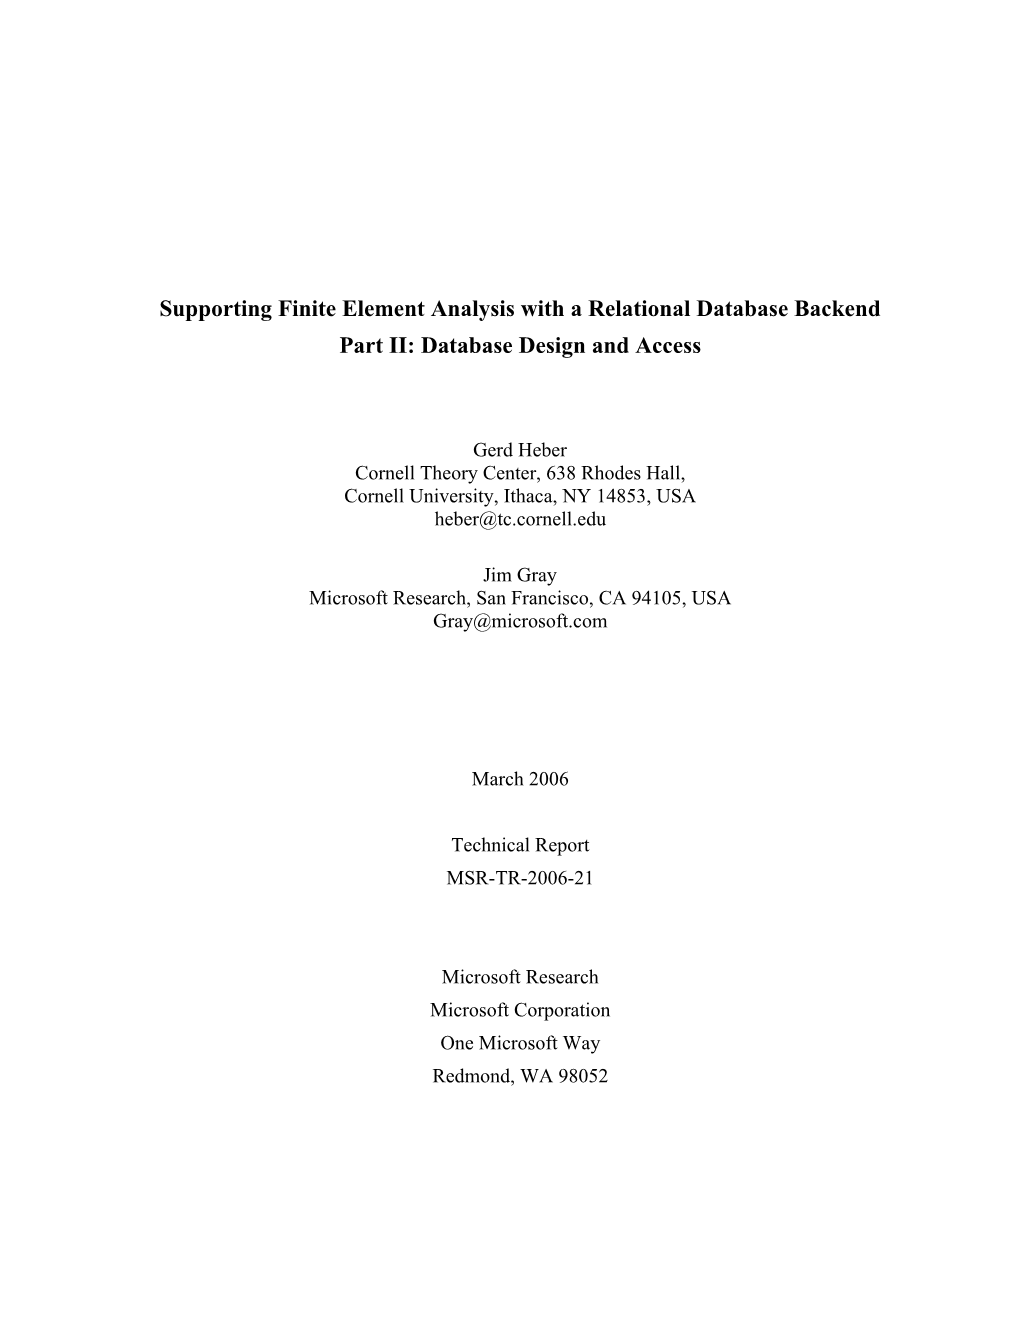 Supporting Finite Element Analysis with a Relational Database Backend